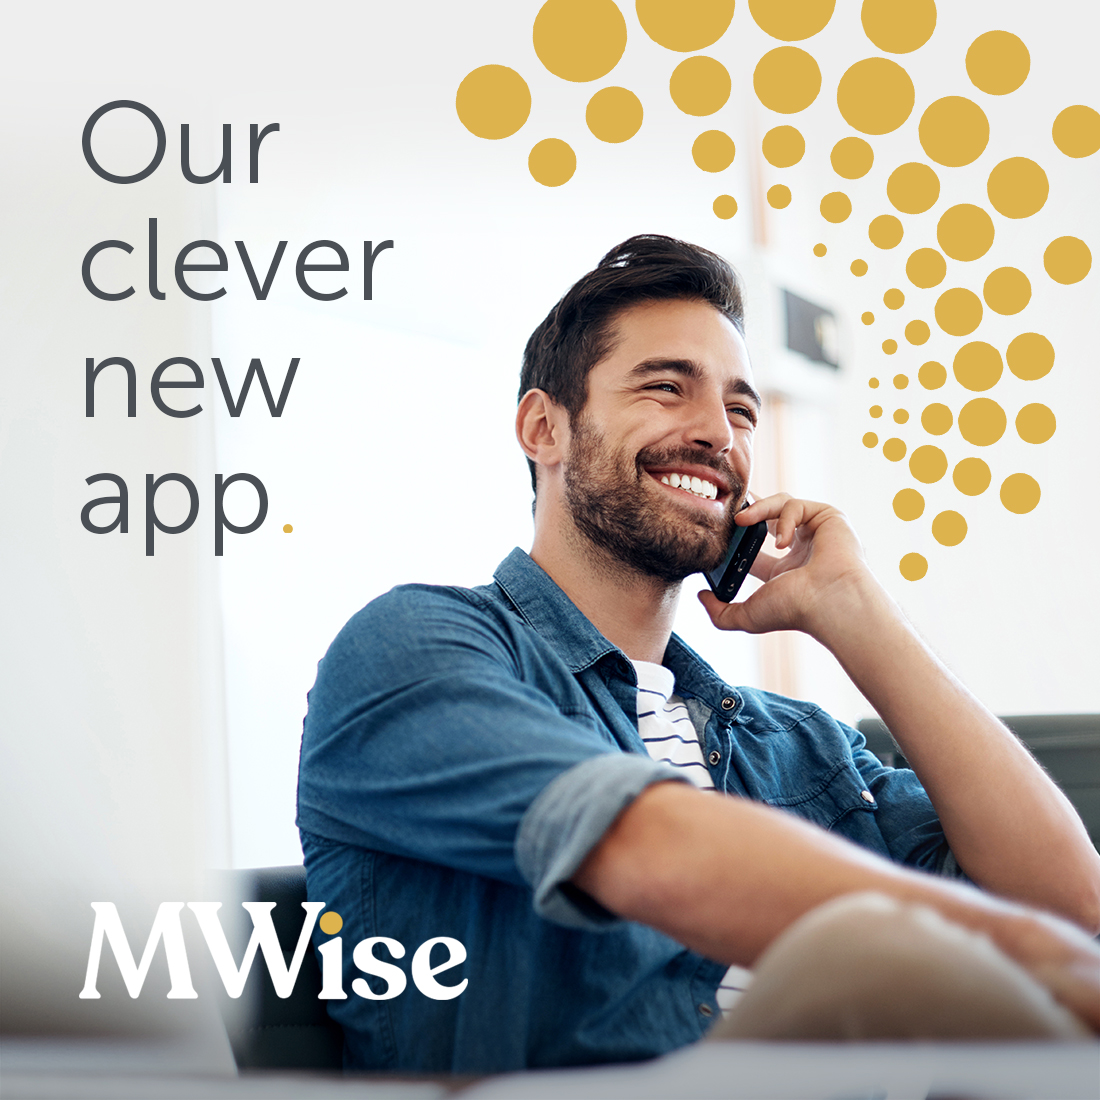 MWise - Our clever new app